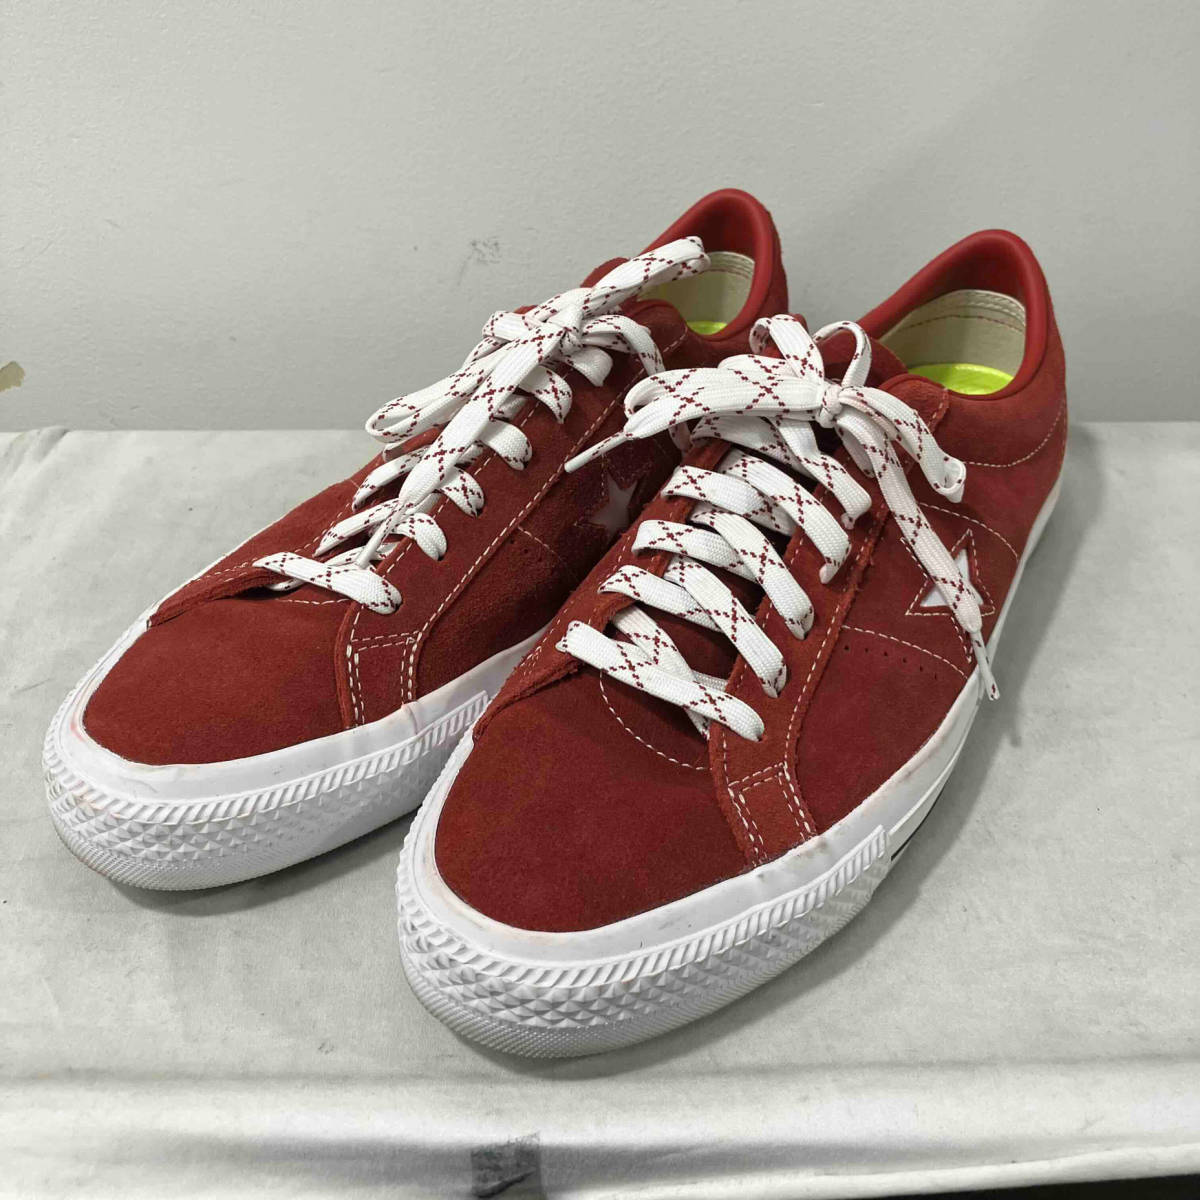 CONVERSE ONE STAR PRO OX COLOR TERRA RED/TERRA RED YEAR 2016 CORD 157873C コンバース スケートボーディング コンズ ワンスター プロ